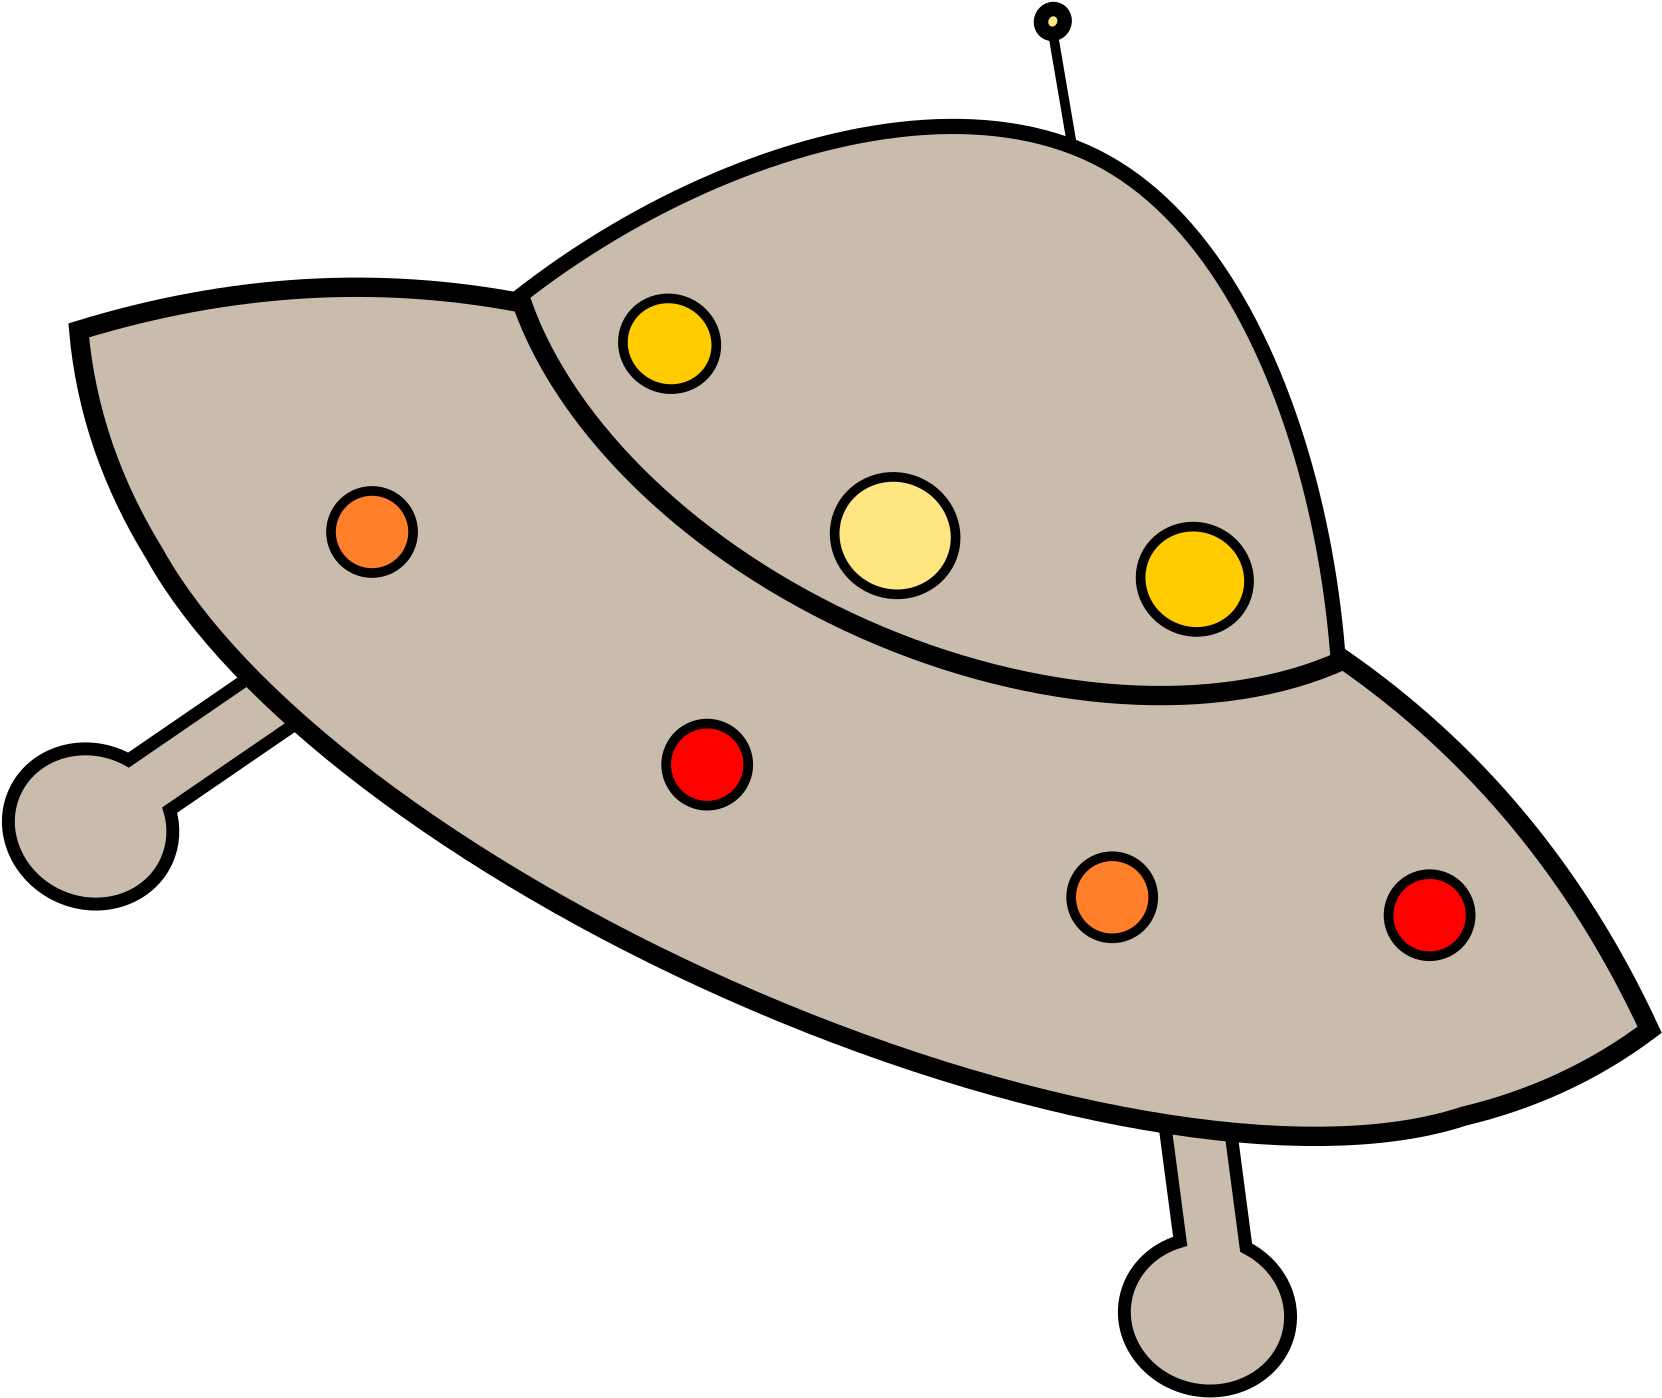 Flying Saucer 1 - Unidentified Flying Object (2400x3394)